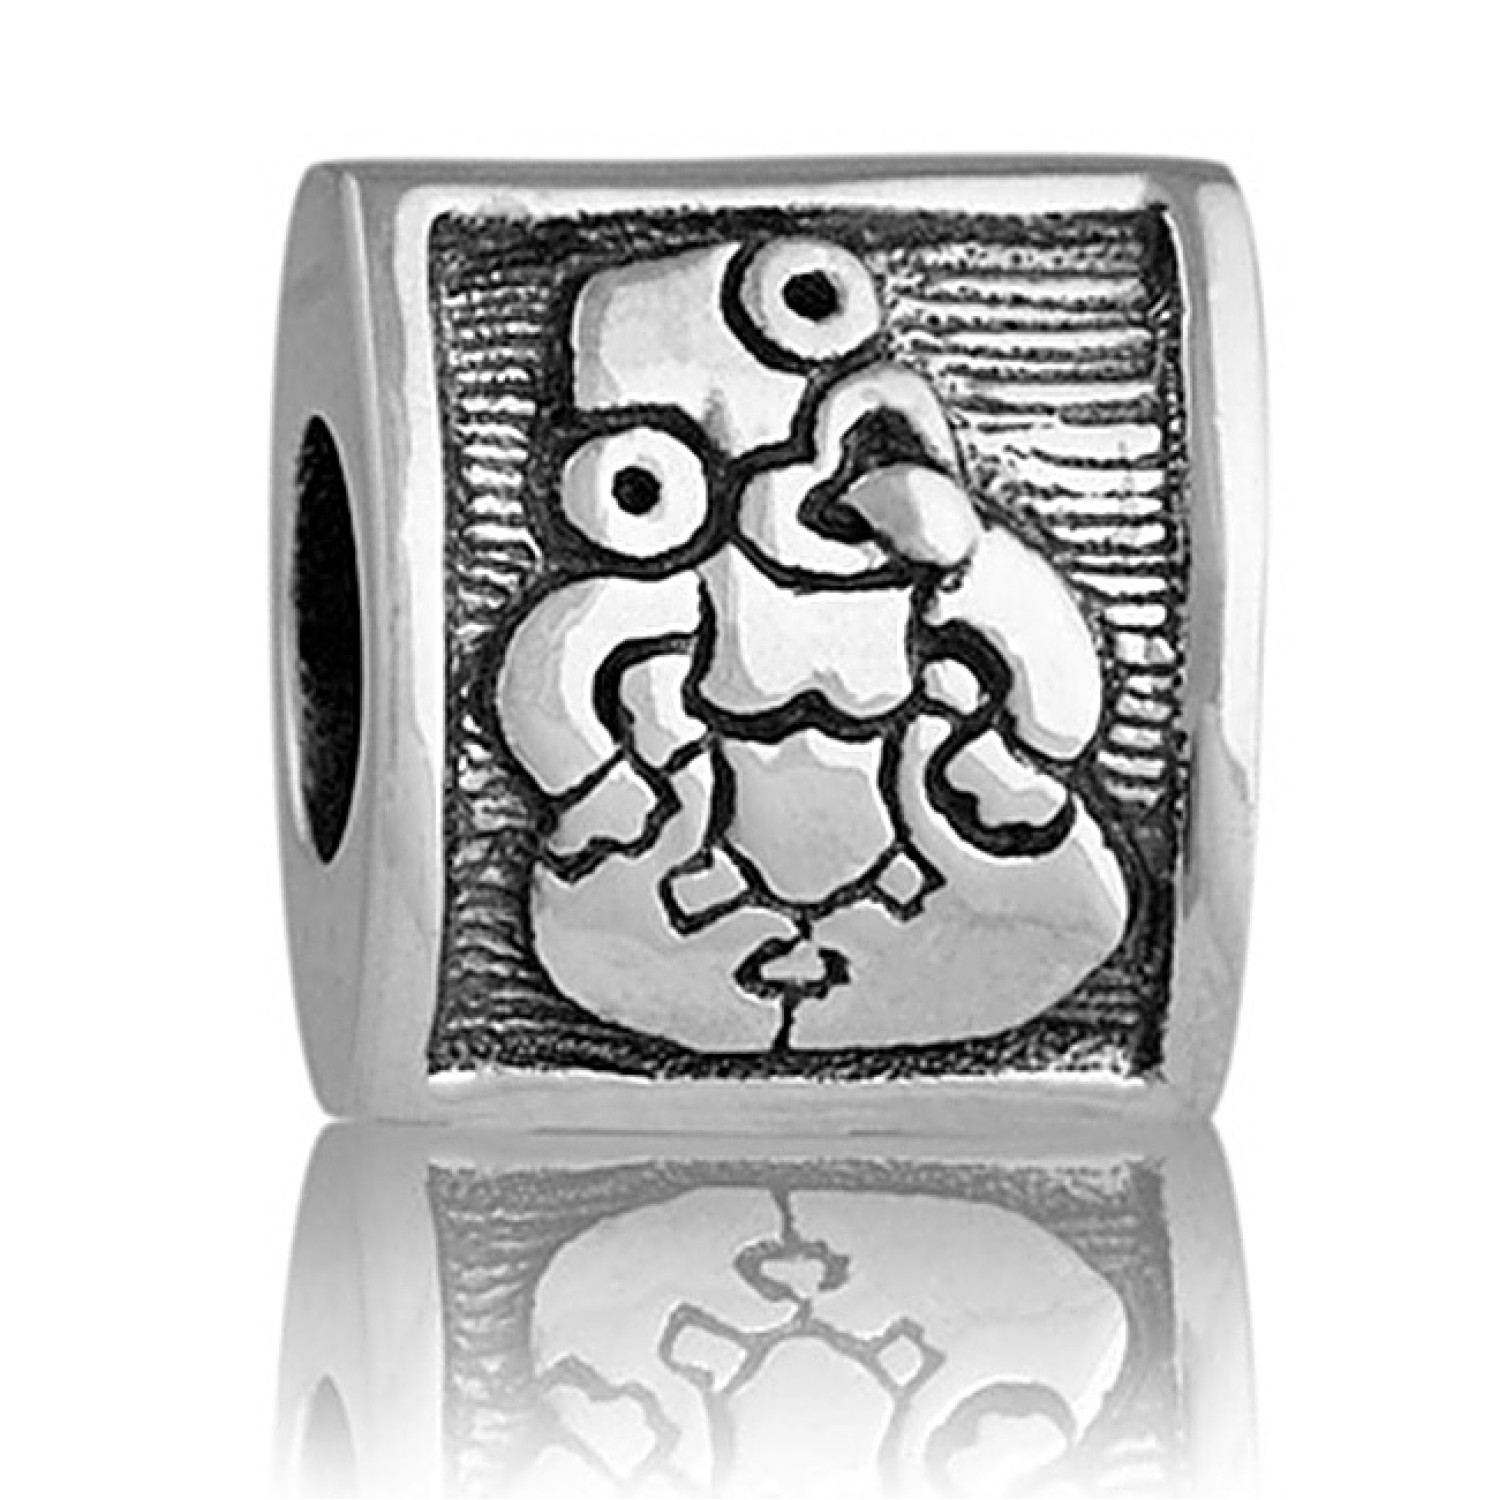 LK034 Evolve Tiki - Fertility and Knowledge. Design inspiration: Fertility and Knowledge. Sterling Silver Christies exclusive 5 year guarantee compatible with all other major brands Bracelets But not compatible with Lovelinks Bracelets (Non Universal Type